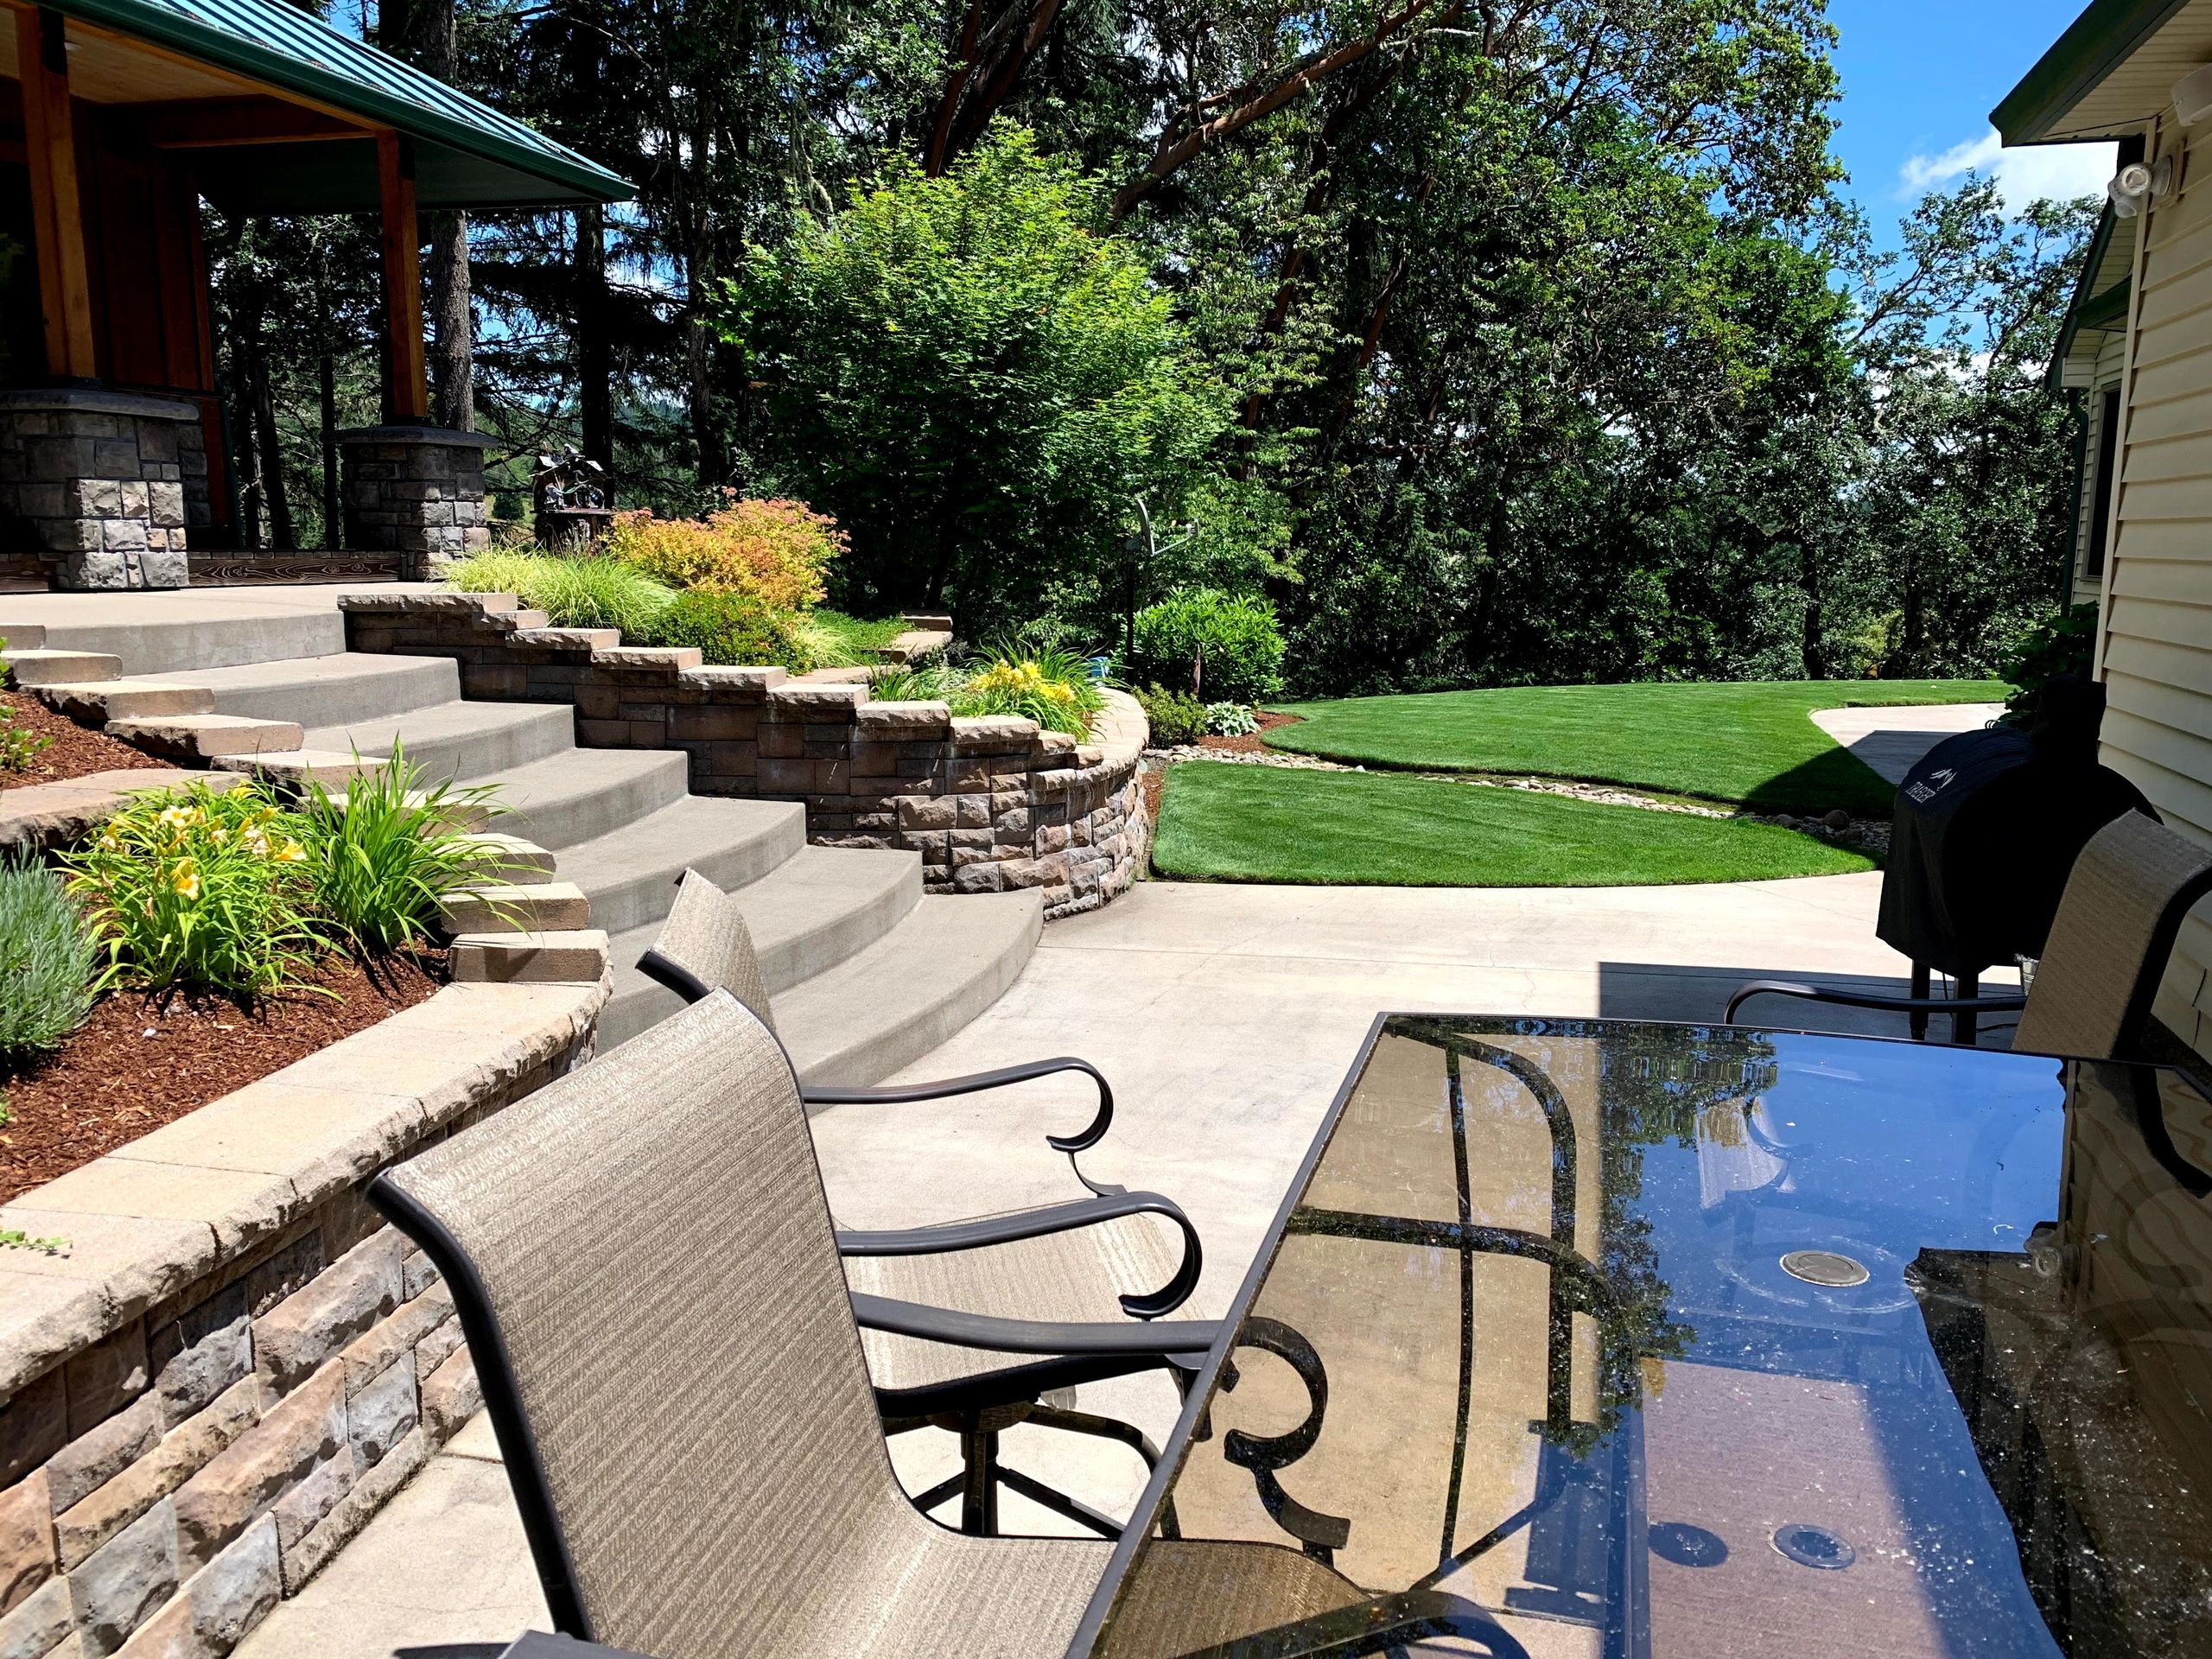 Imagine the peace of mind while enjoying your  outdoor living space!